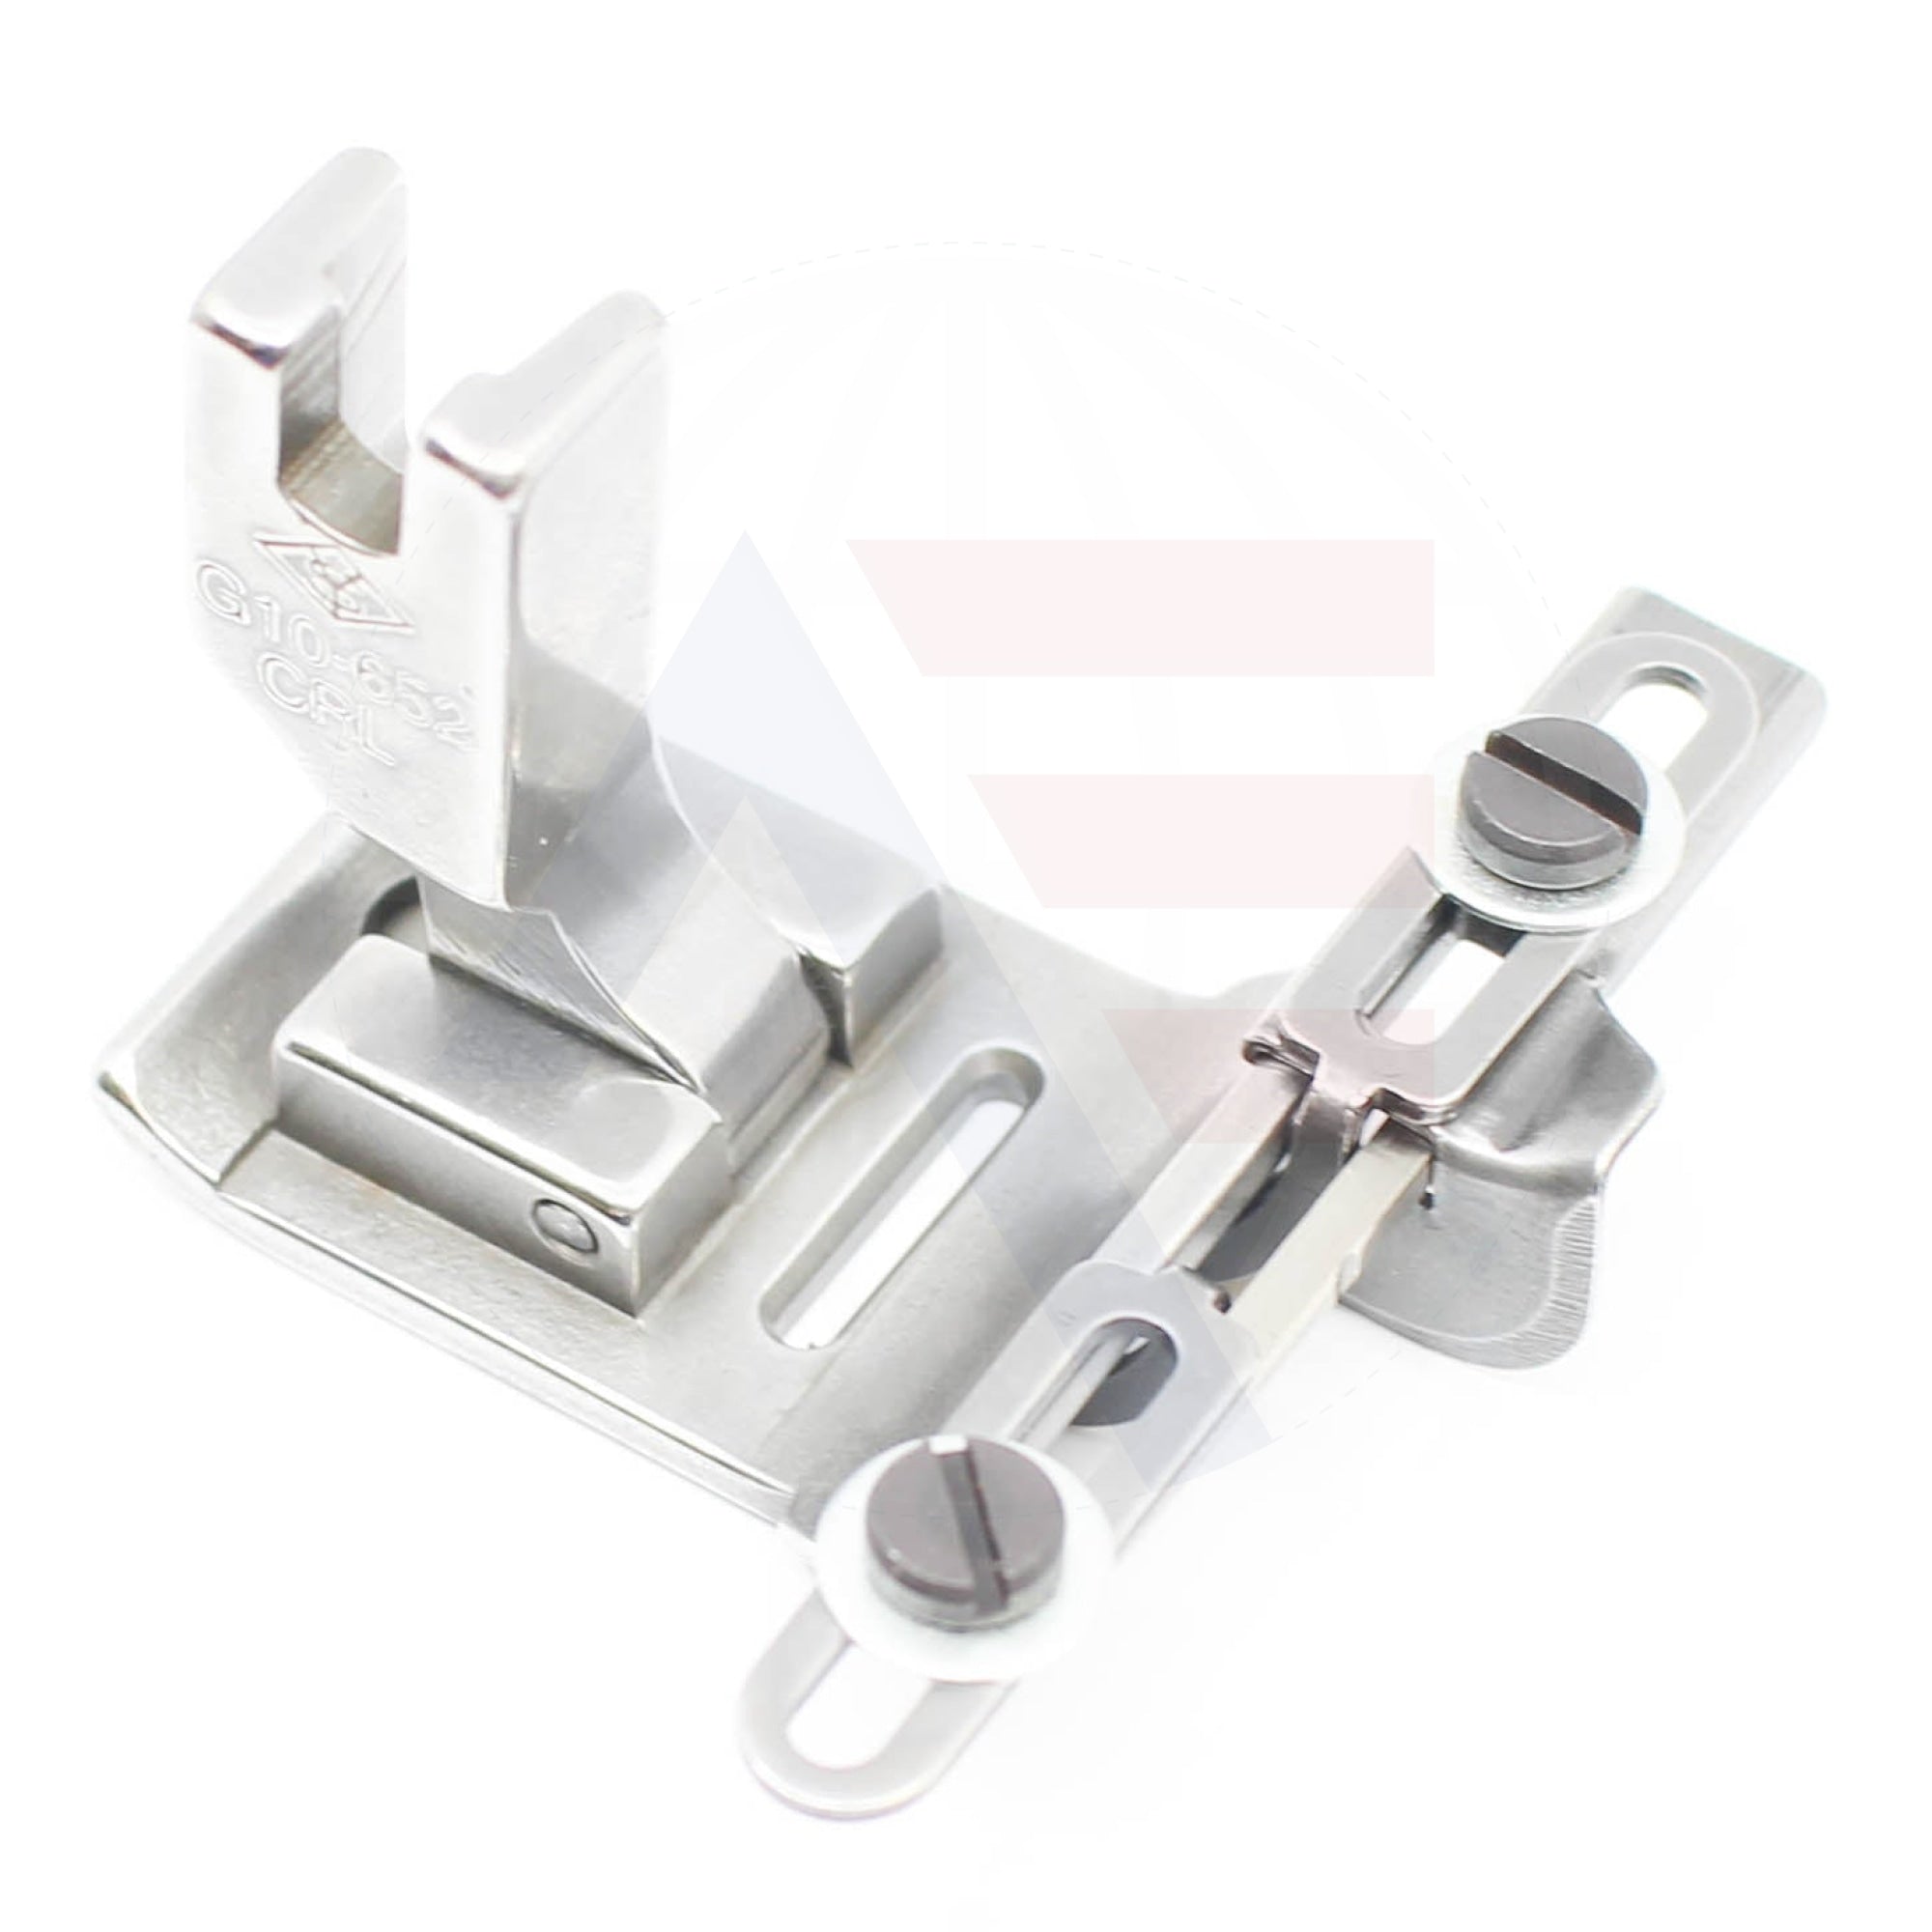 G10652Crl Cloth Guide Foot Sewing Machine Spare Parts